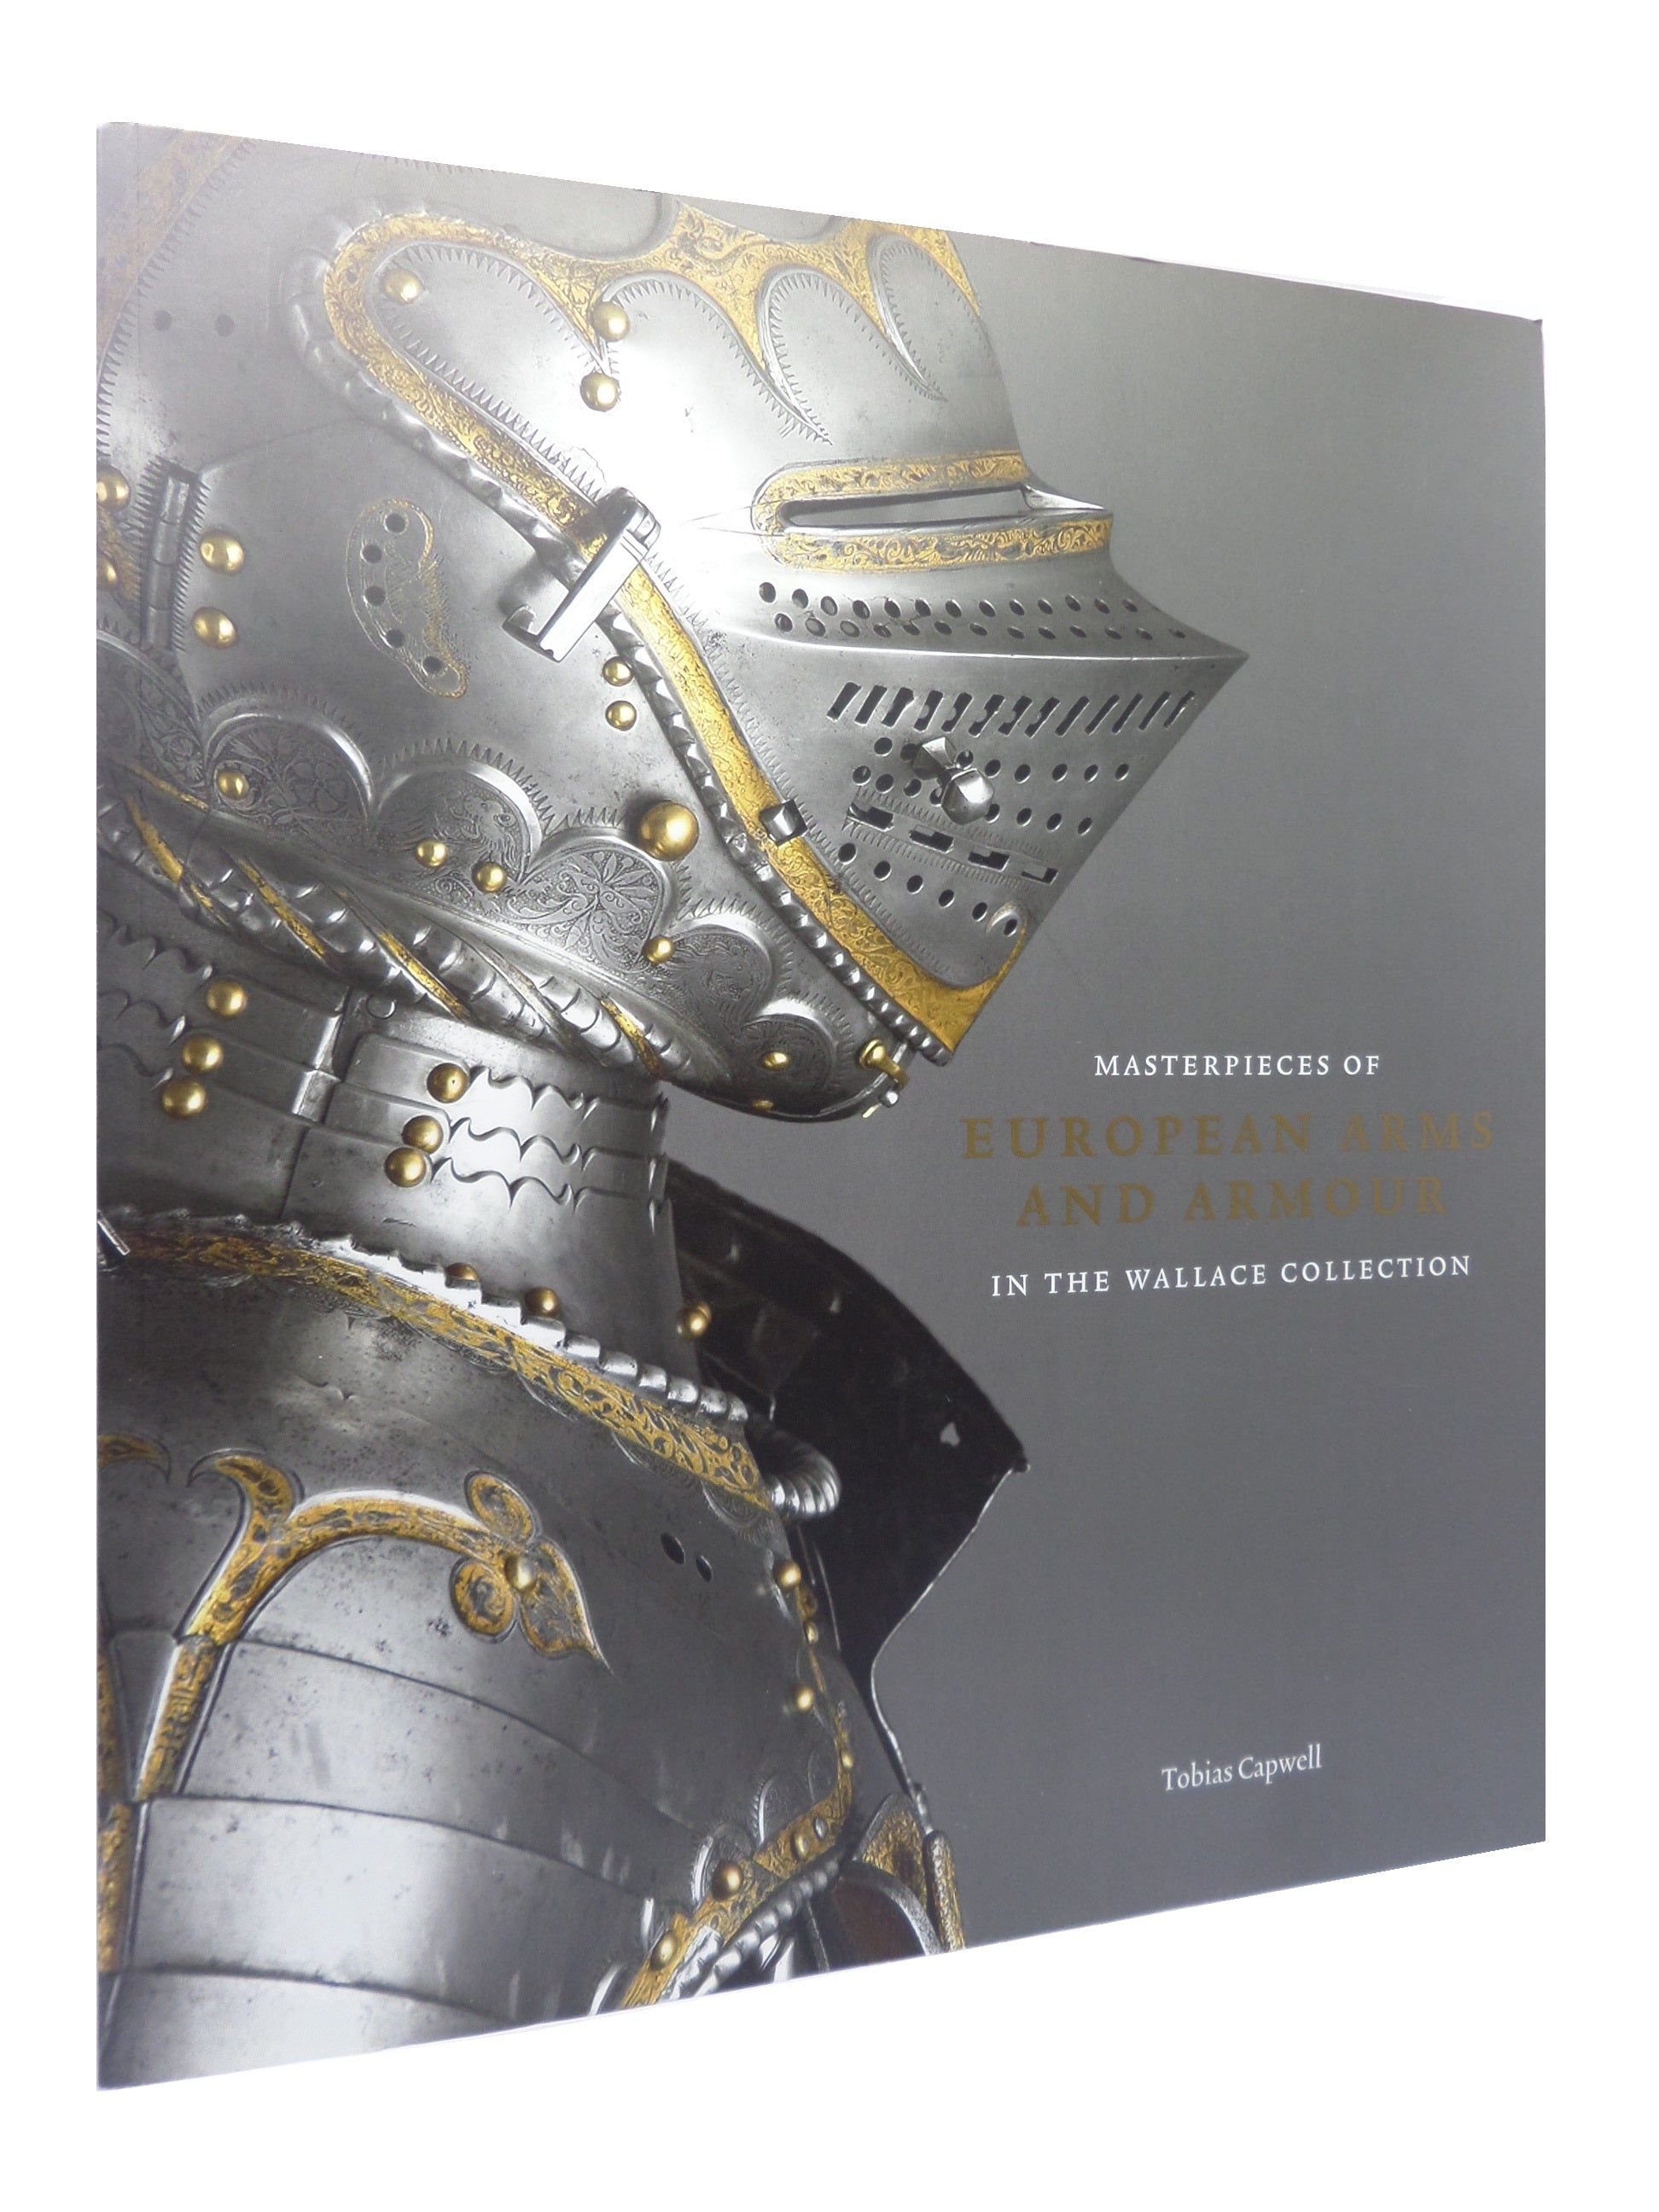 MASTERPIECES OF EUROPEAN ARMS & ARMOUR IN THE WALLACE COLLECTION TOBIAS CAPWELL